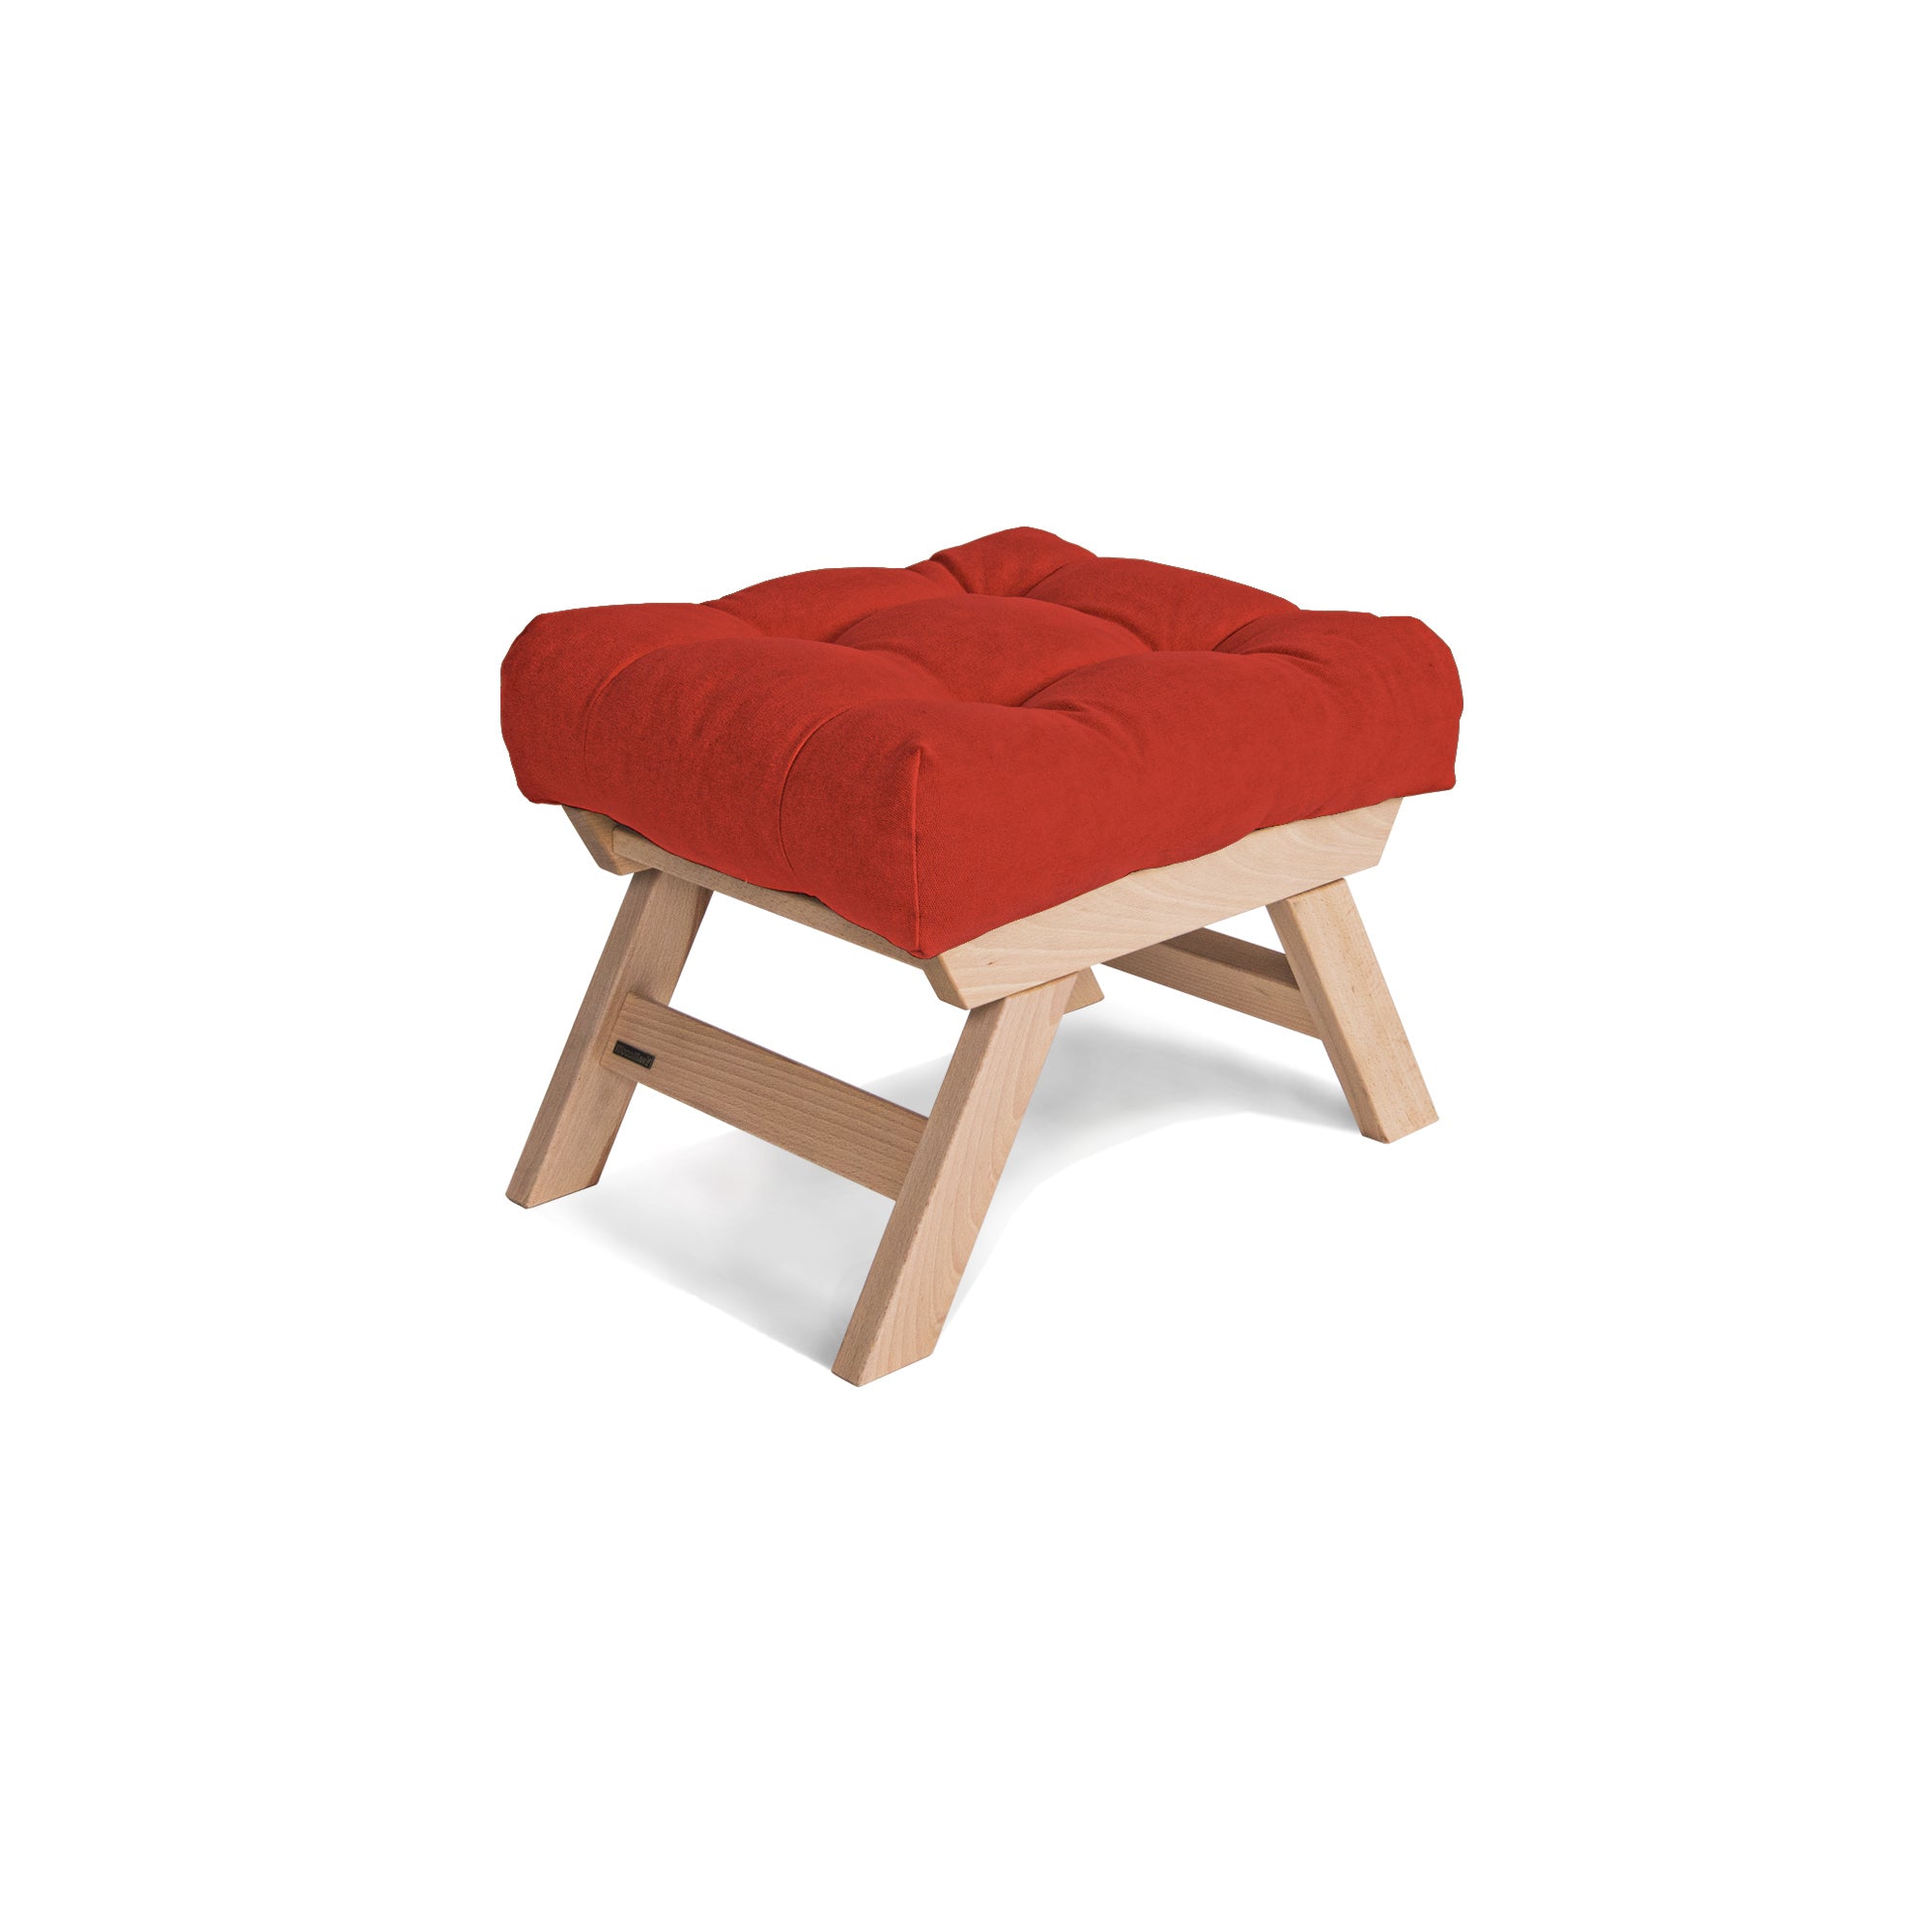 ALLEGRO Pouffe, Beech Wood upholstery colour red